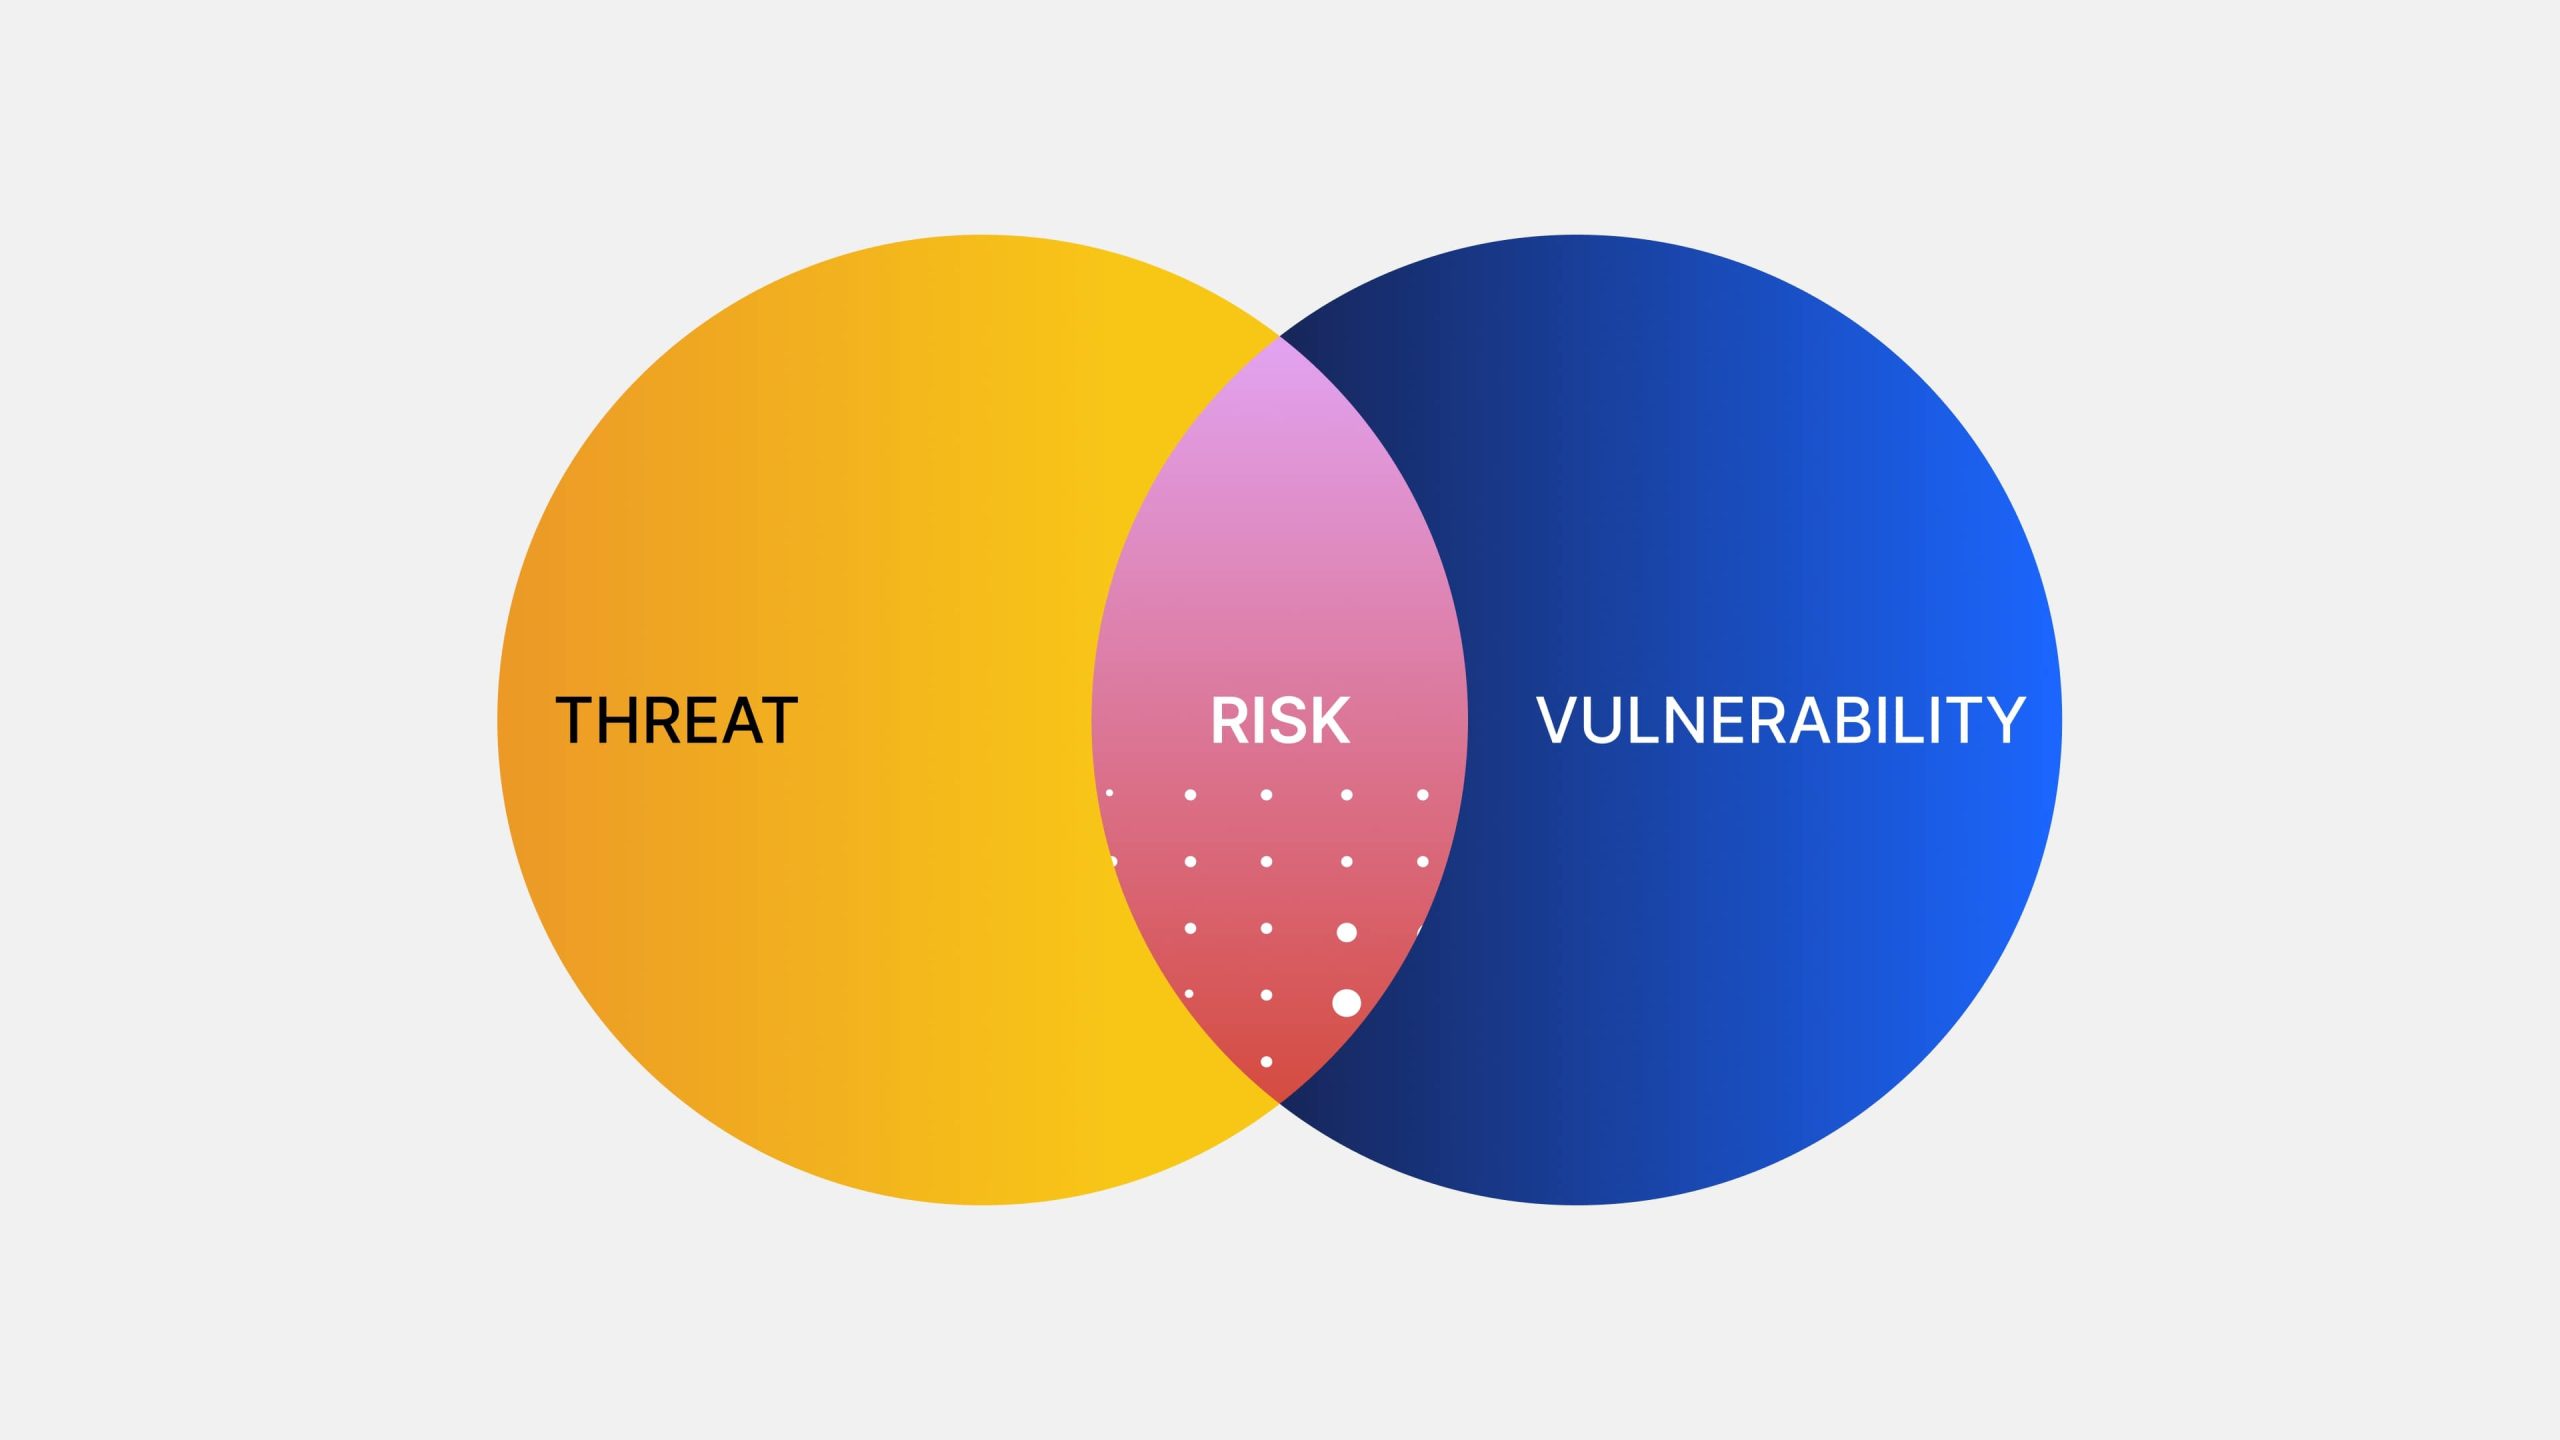 A designed (and branded) visual showing that risk is where Threats and vulnerabilities overlap.